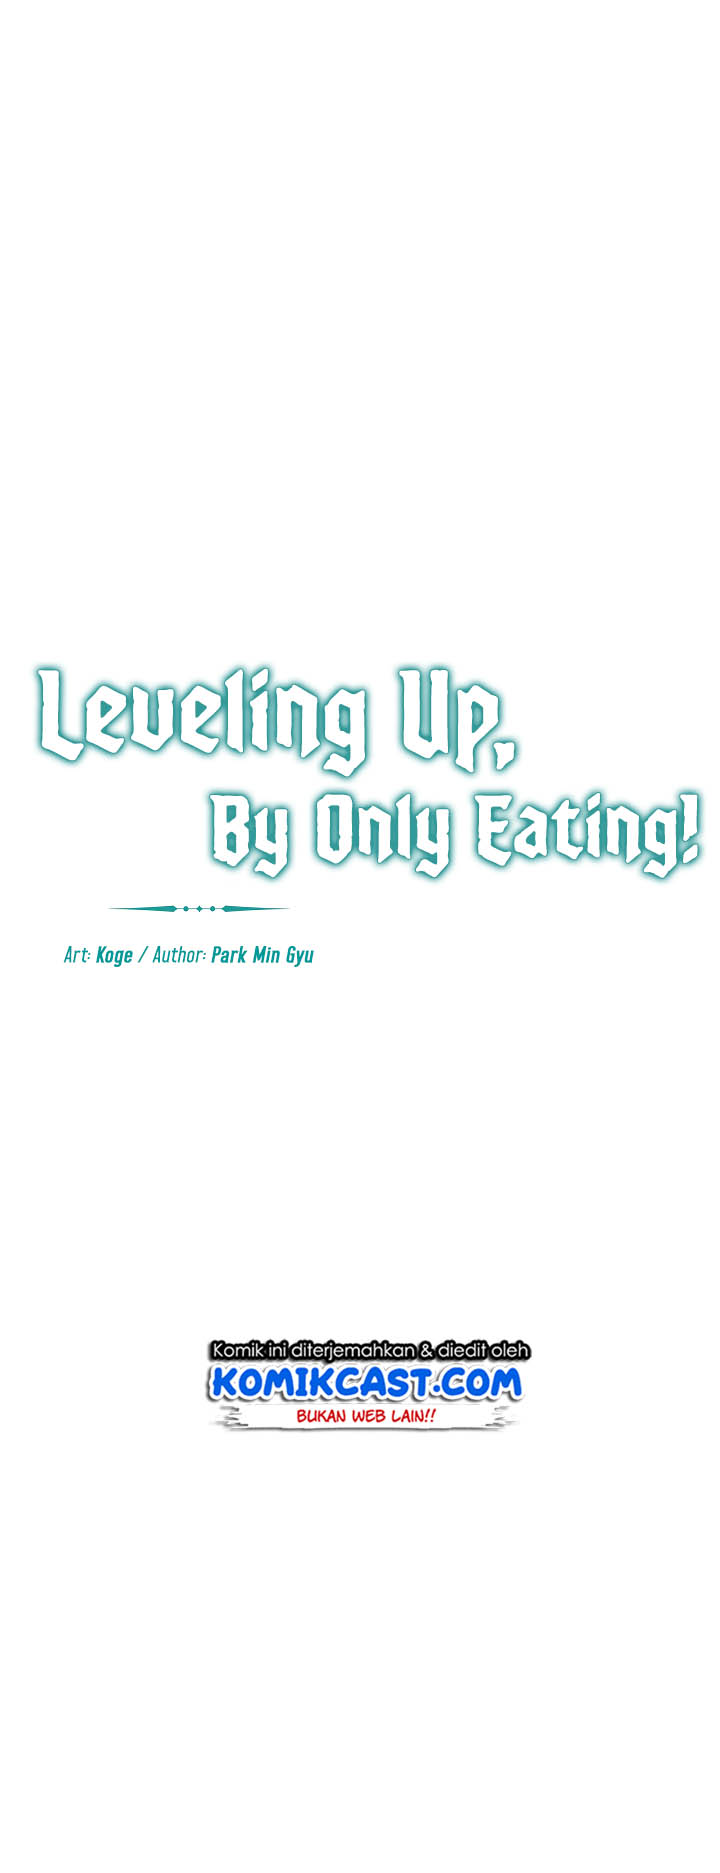 Leveling Up, by Only Eating! Chapter 8 Image 13